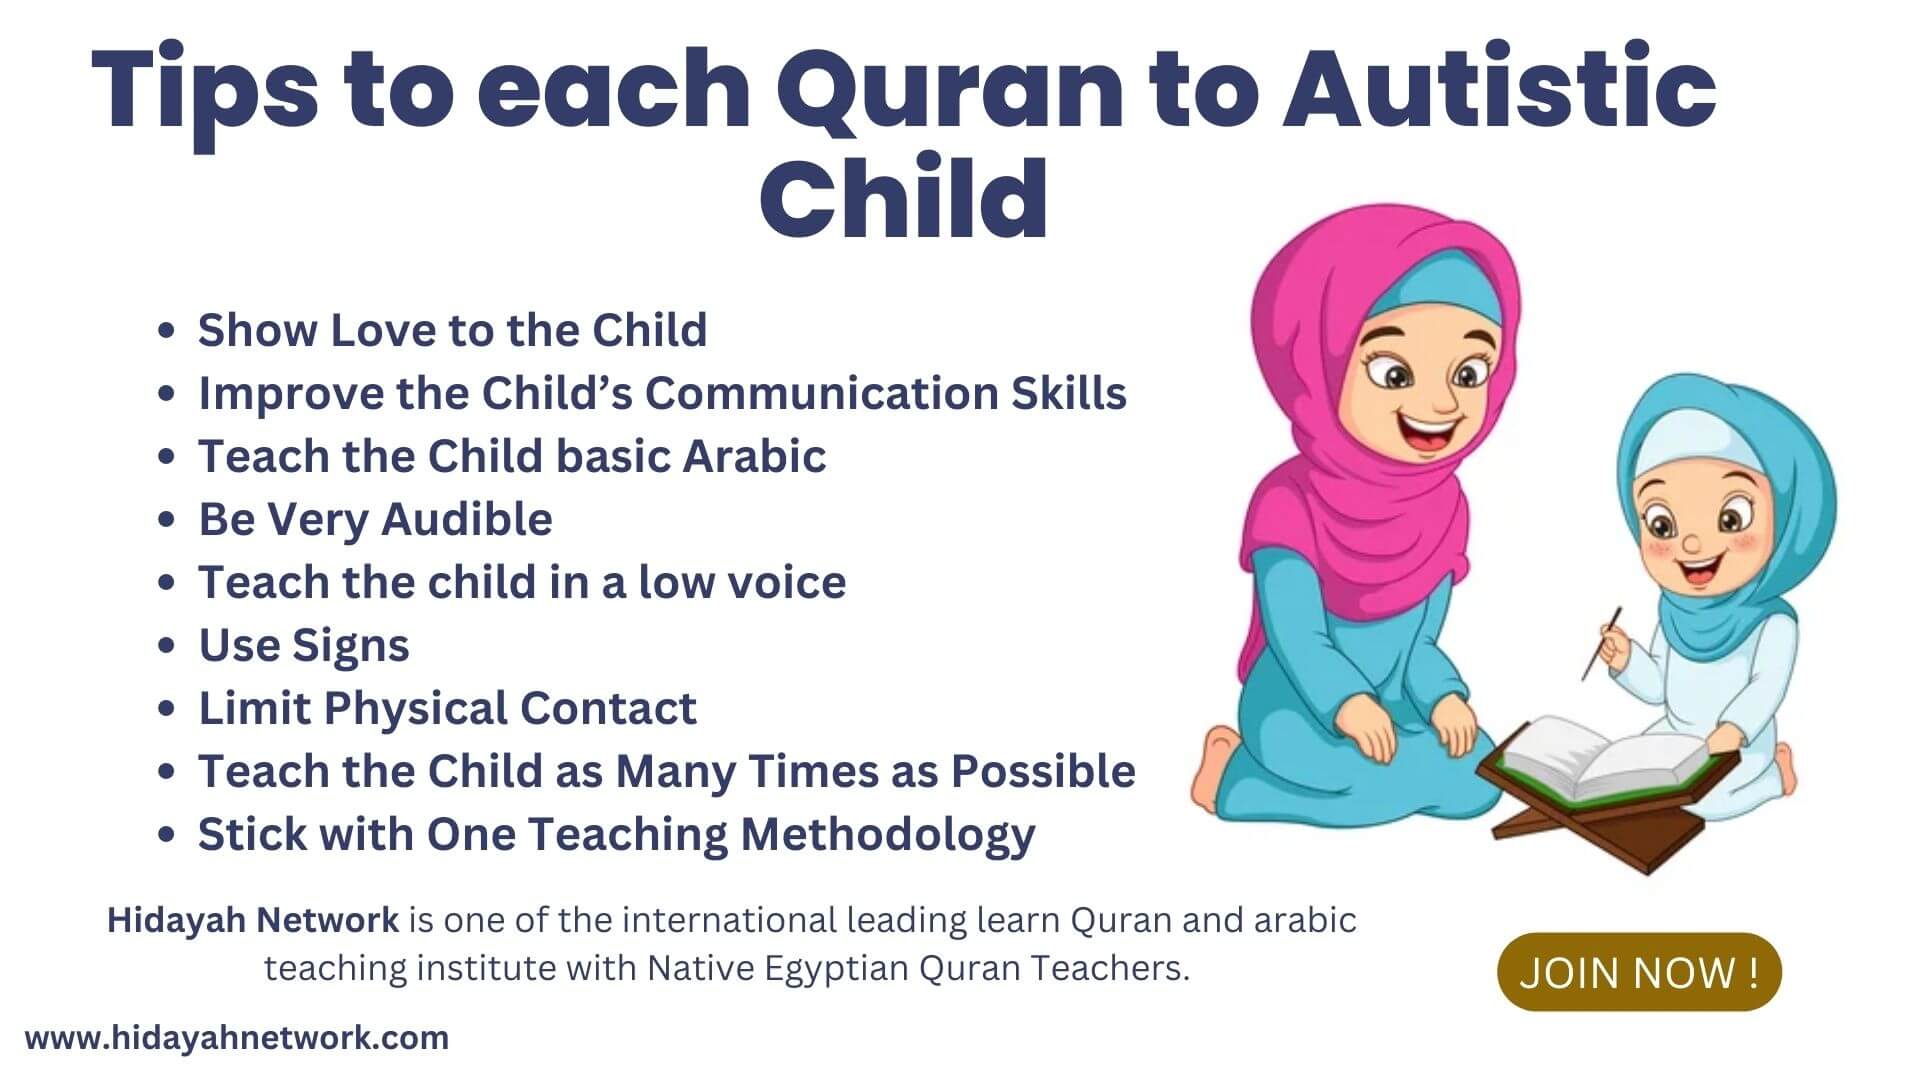 Tips to each Quran to Autistic Child